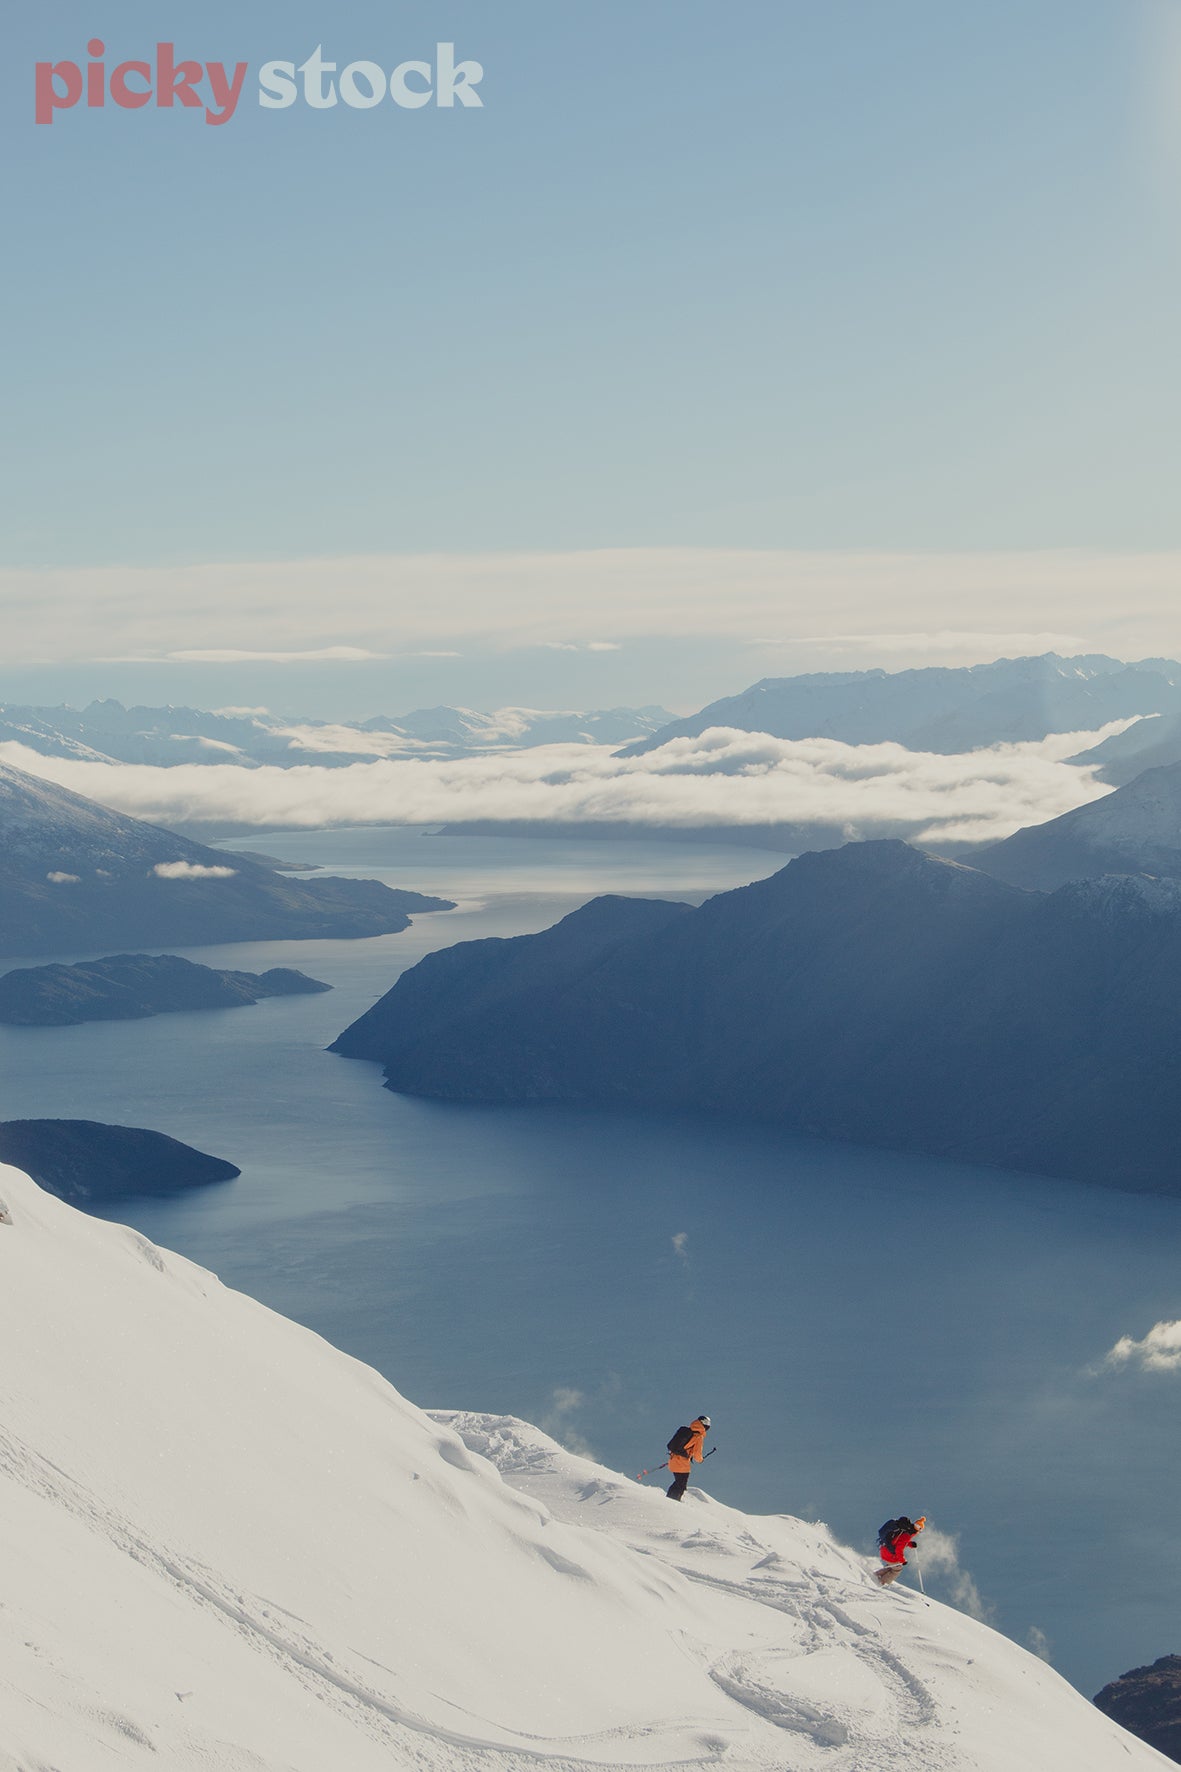 Two skiers with ski poles, skiing down the summit of Roys Peak in winter. One skier is wearing a bright orange jacket, and the other bright red. Both black backpacks, portrait view looking down at the blue body of water in Wanaka. 